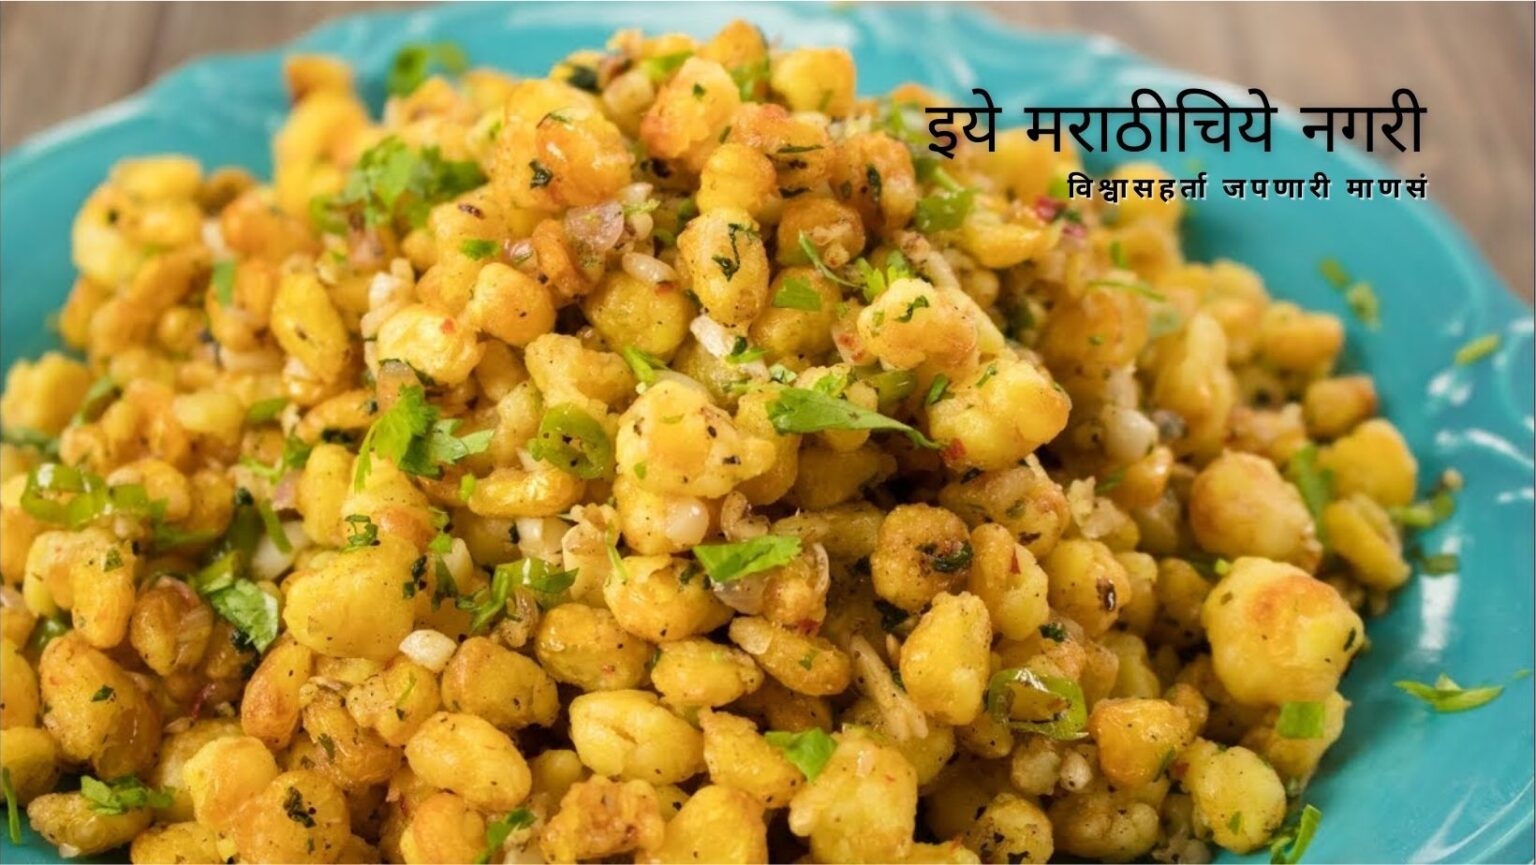 making-chivada-from-sweet-corn-flakes-recipe-by-smita-patil